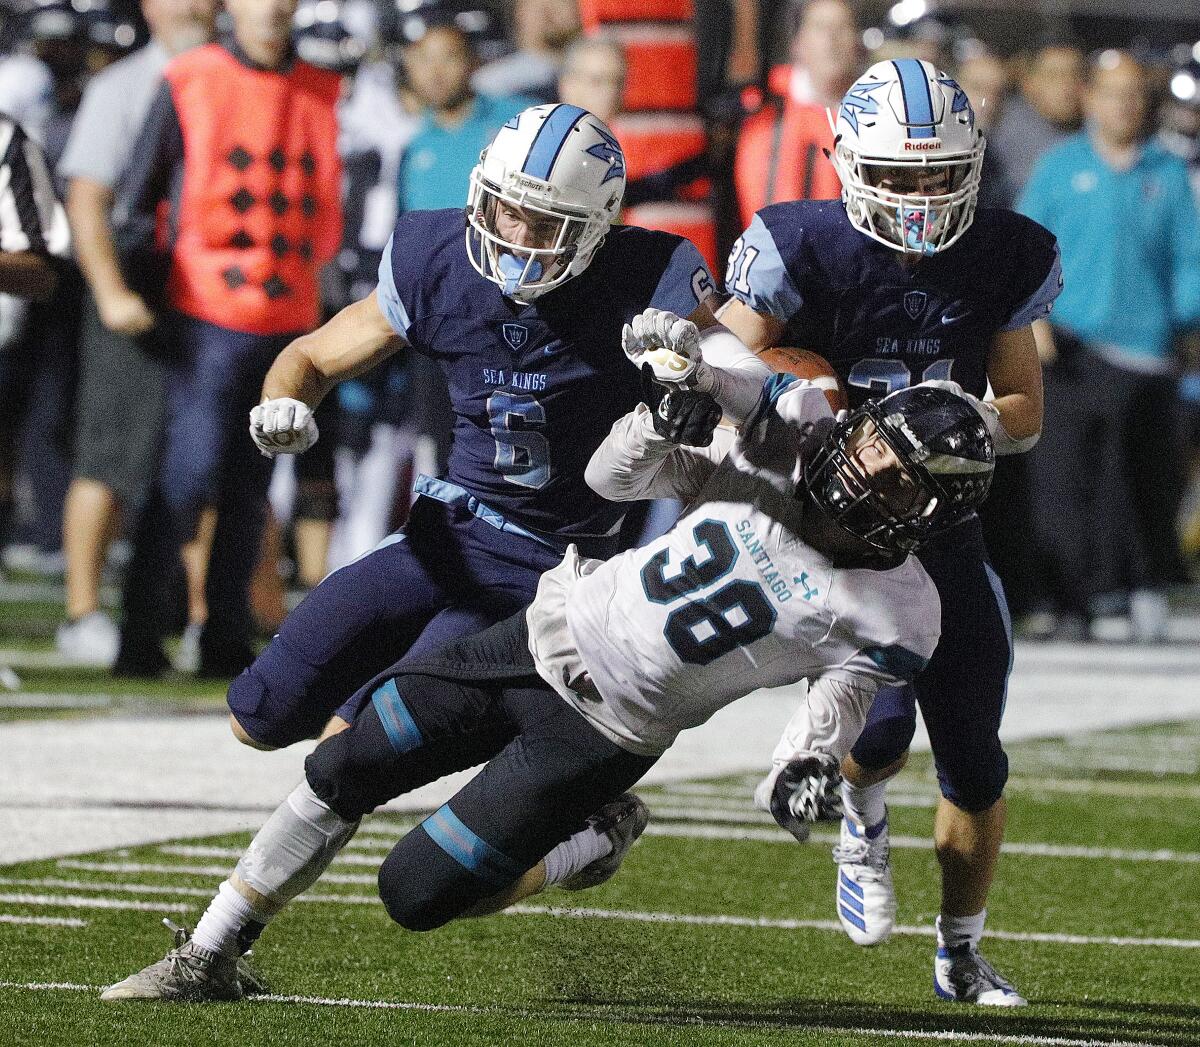 Corona del Mar's John Humphreys, left, puts a block on Santiago's Aiden Boon to free running back Riley Binnquist for a touchdown in the first round of the CIF Southern Section Division 3 playoffs on Friday at Newport Harbor High.